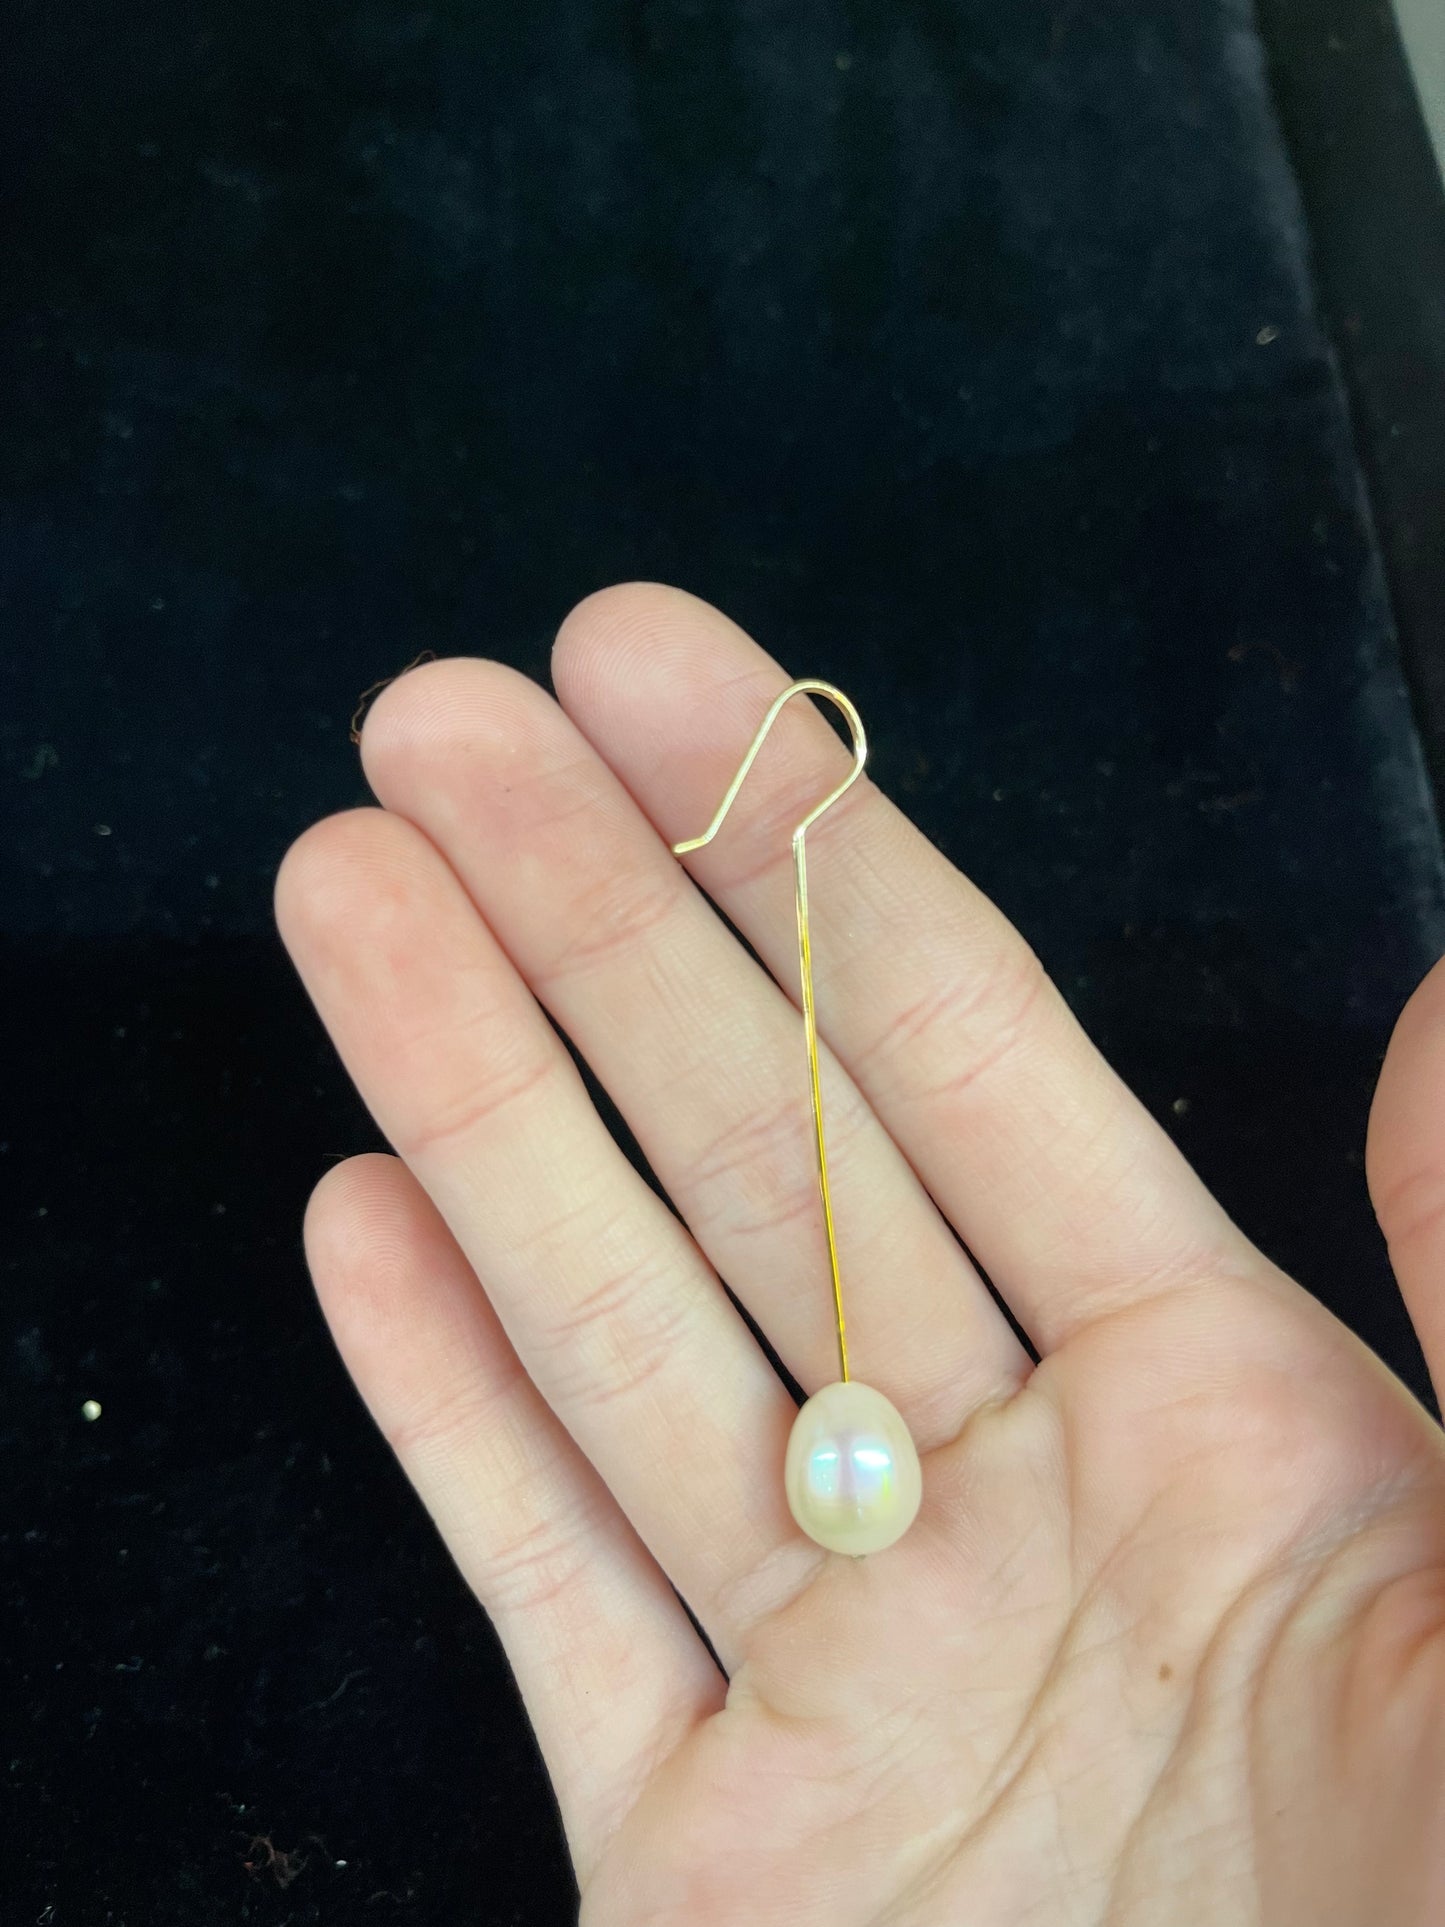 14k Gold Filled and Freshwater Pearl Dangle Earrings